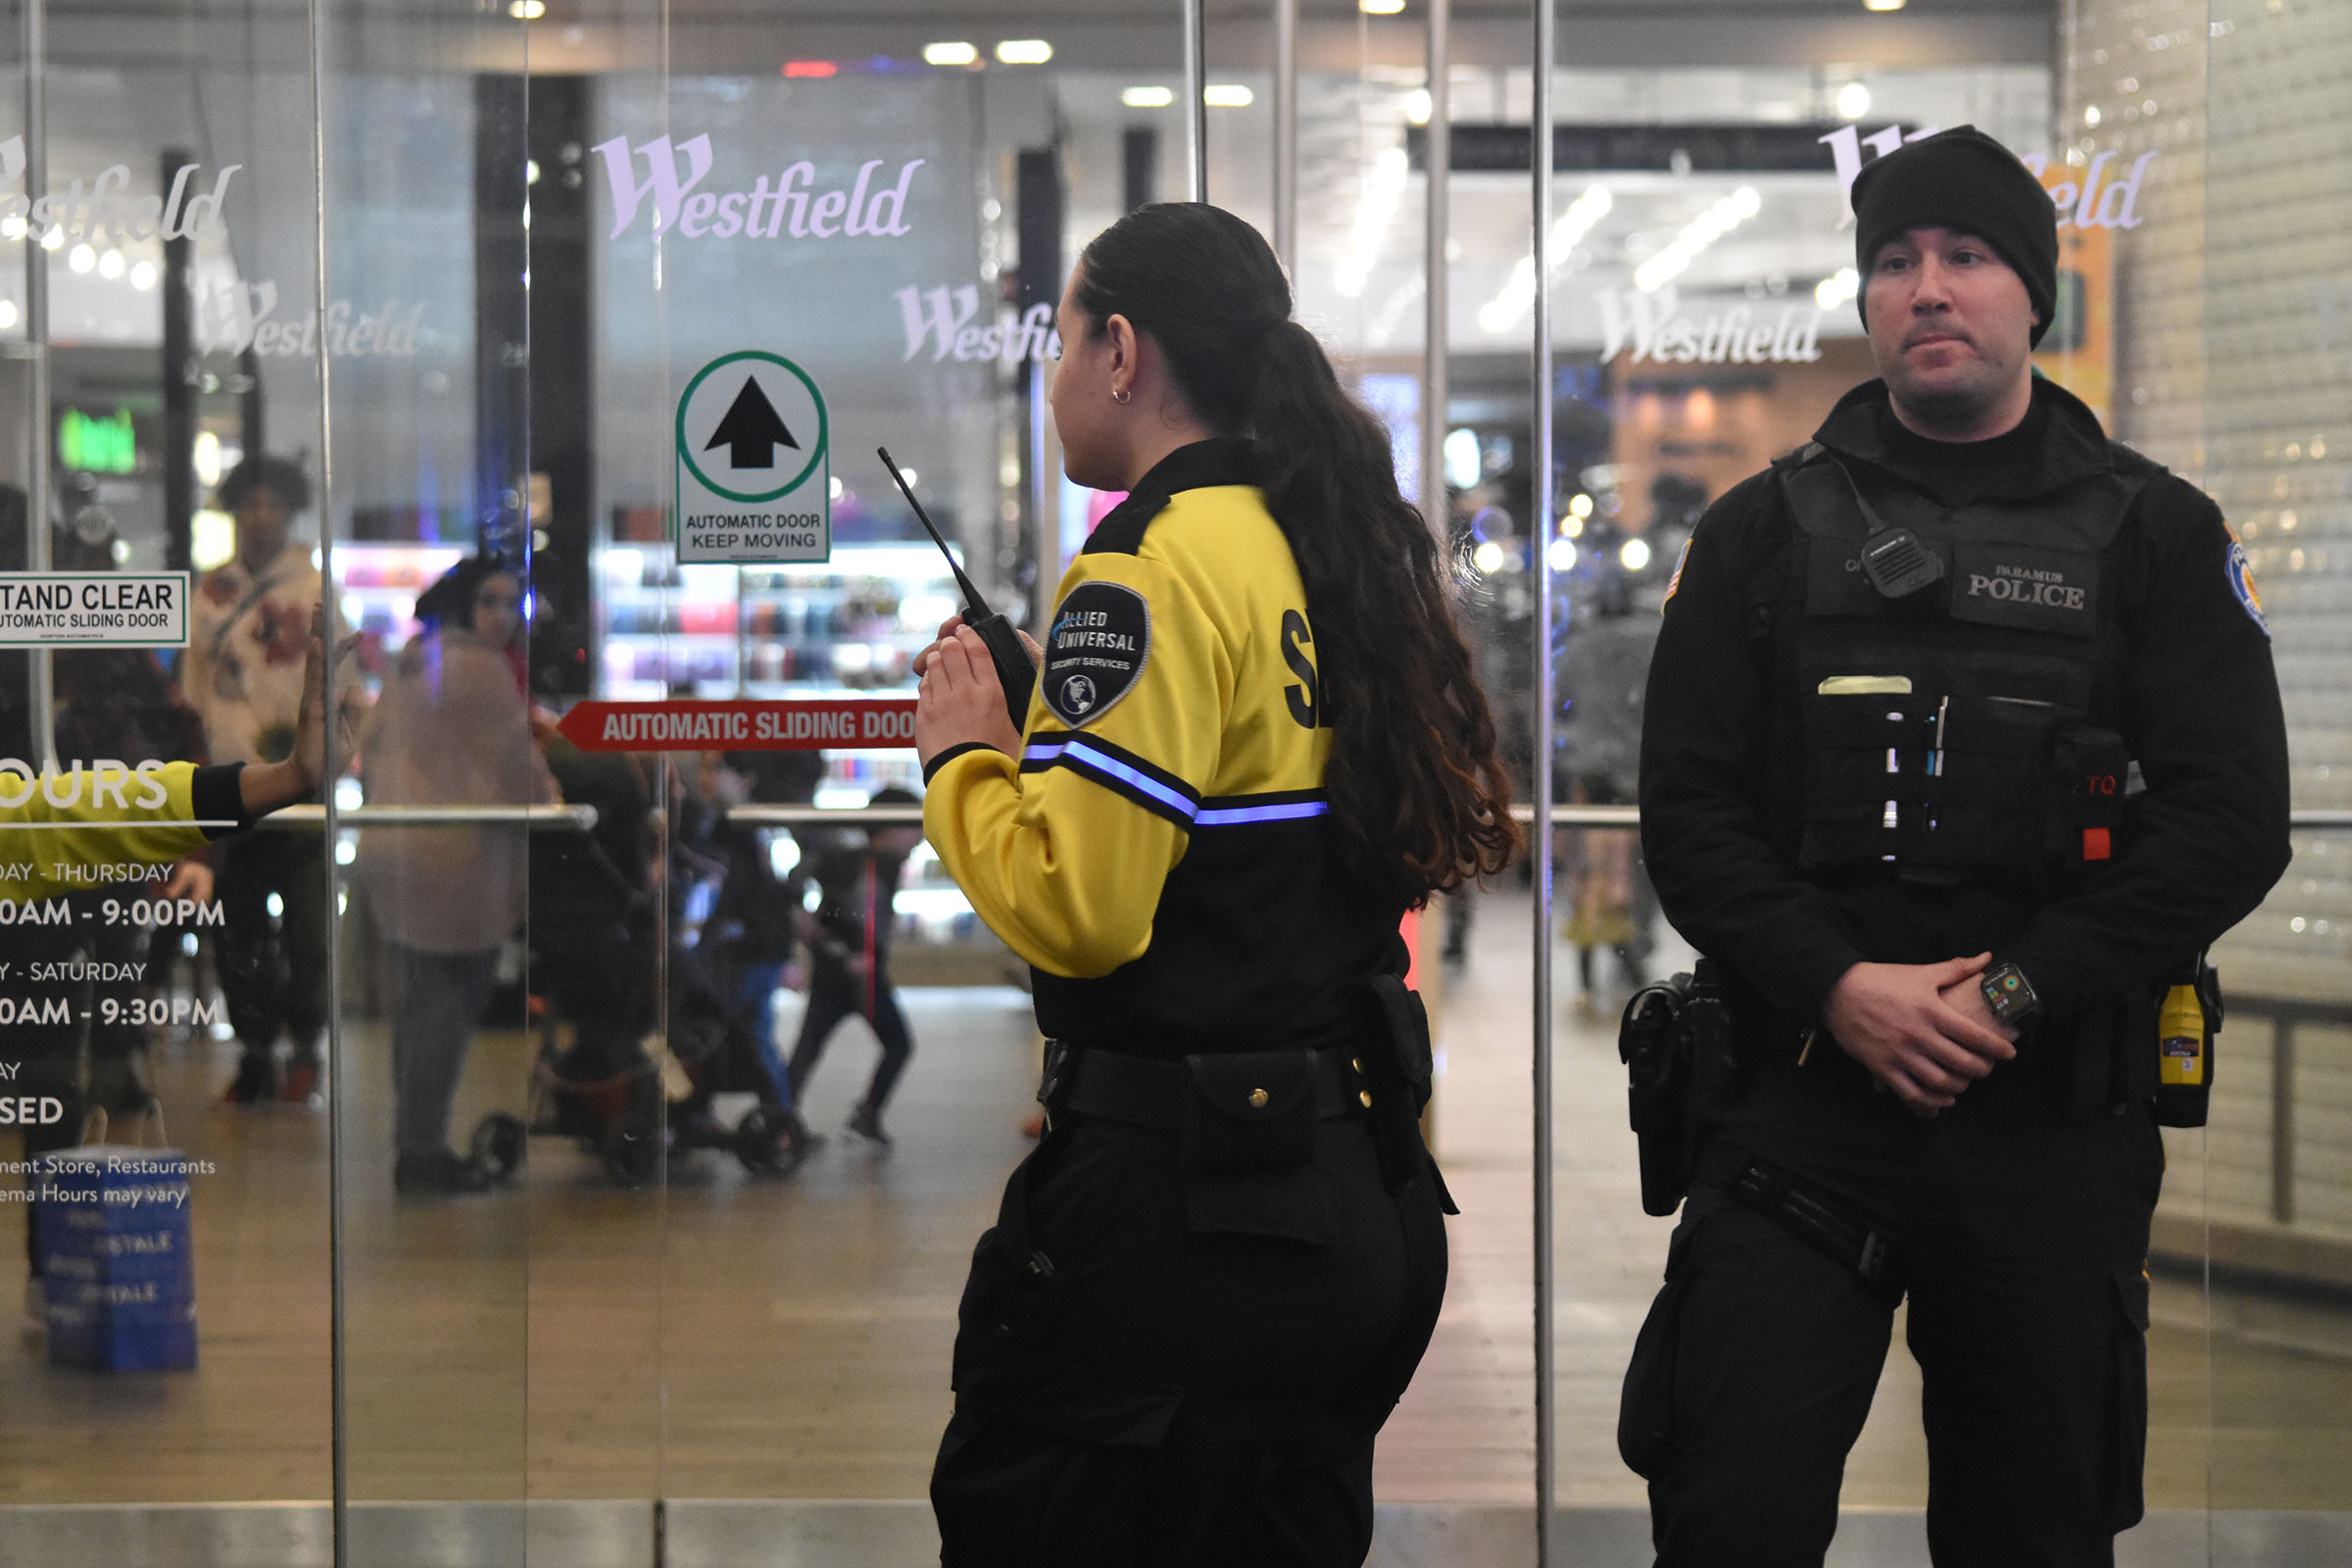 Security guards and police at Garden State Plaza mall in Paramus, NJ, following a reports of a large fight in the mall, on March 11, 2023. (Kyle Mazza—NurPhoto/Reuters)